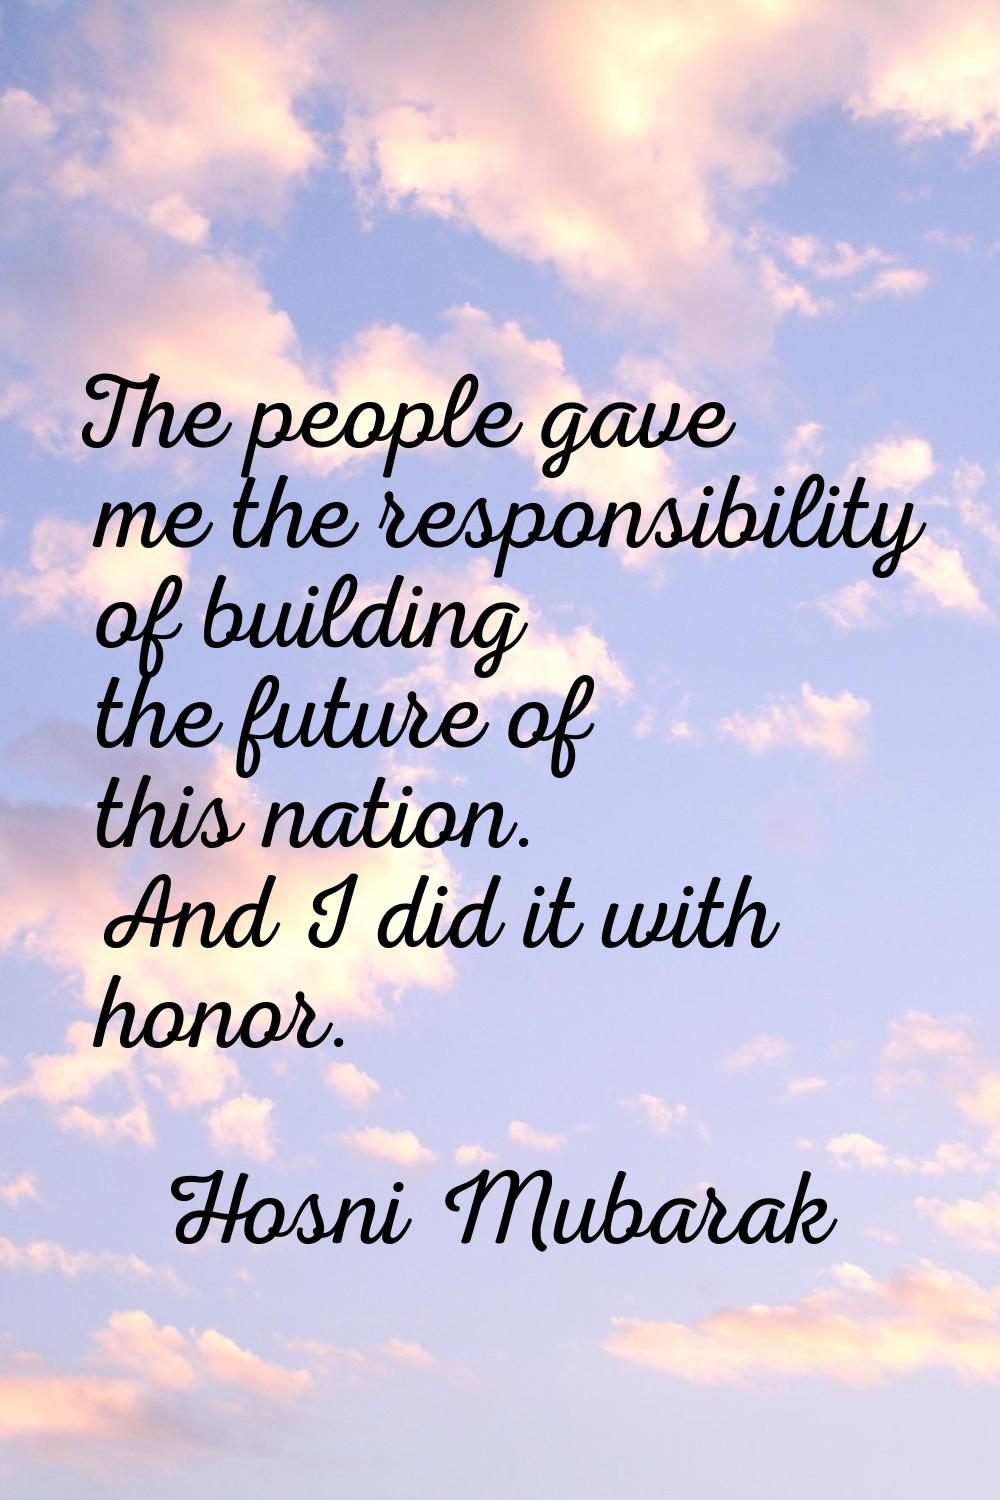 The people gave me the responsibility of building the future of this nation. And I did it with hono